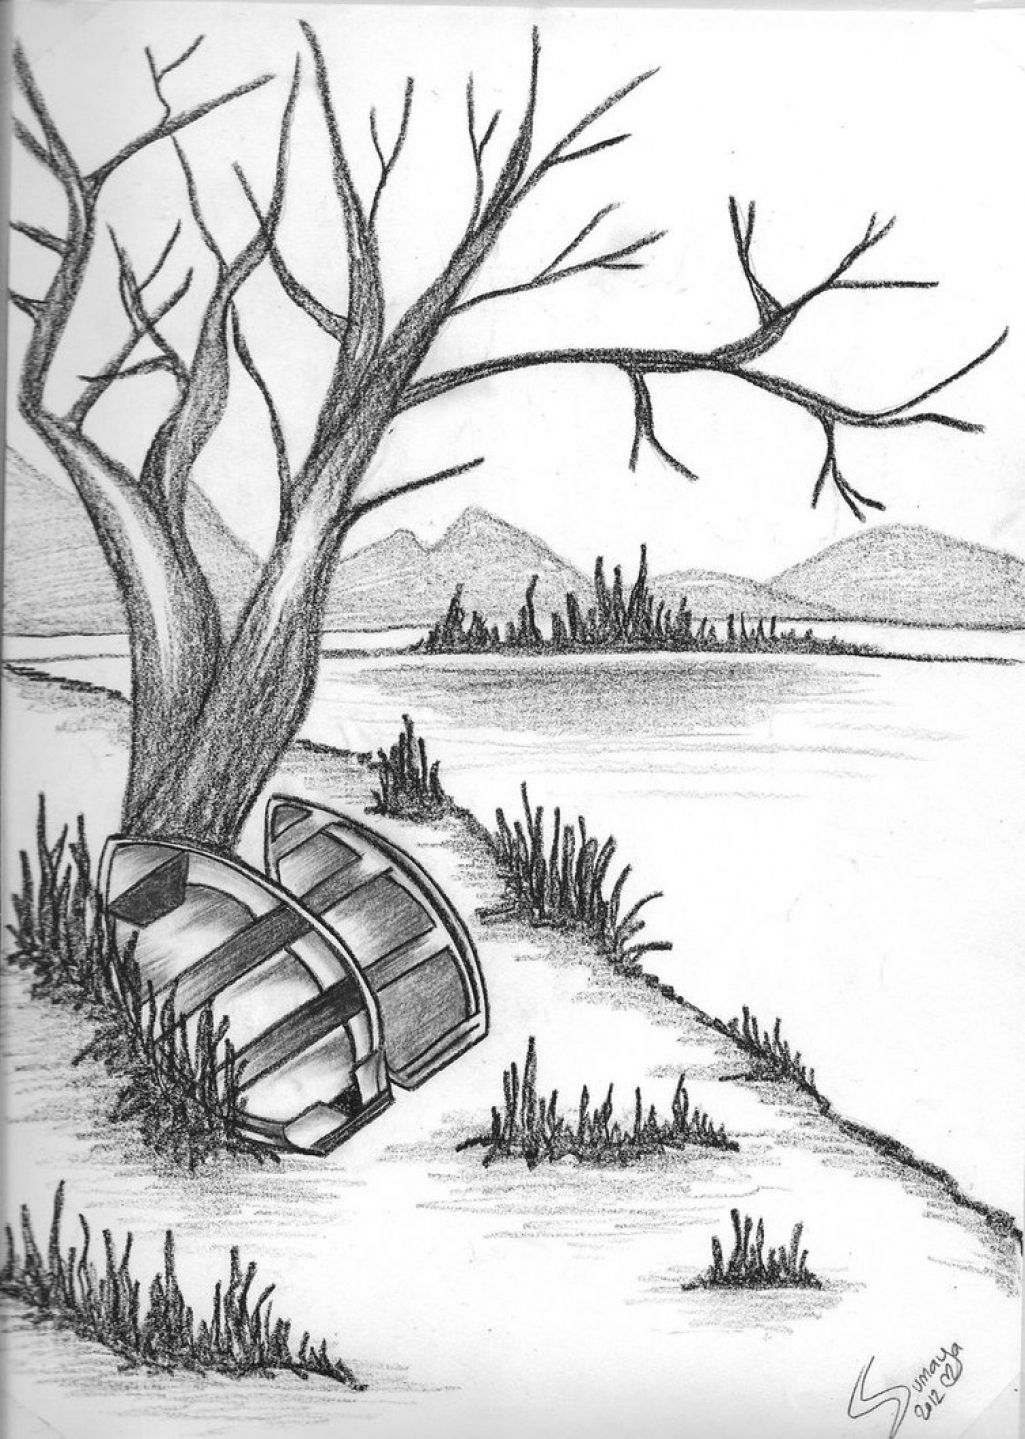 How to Draw Scenery of Moonlight Night by pencil sketch Love Birds Scen   Art drawings beautiful Landscape pencil drawings Nature art drawings